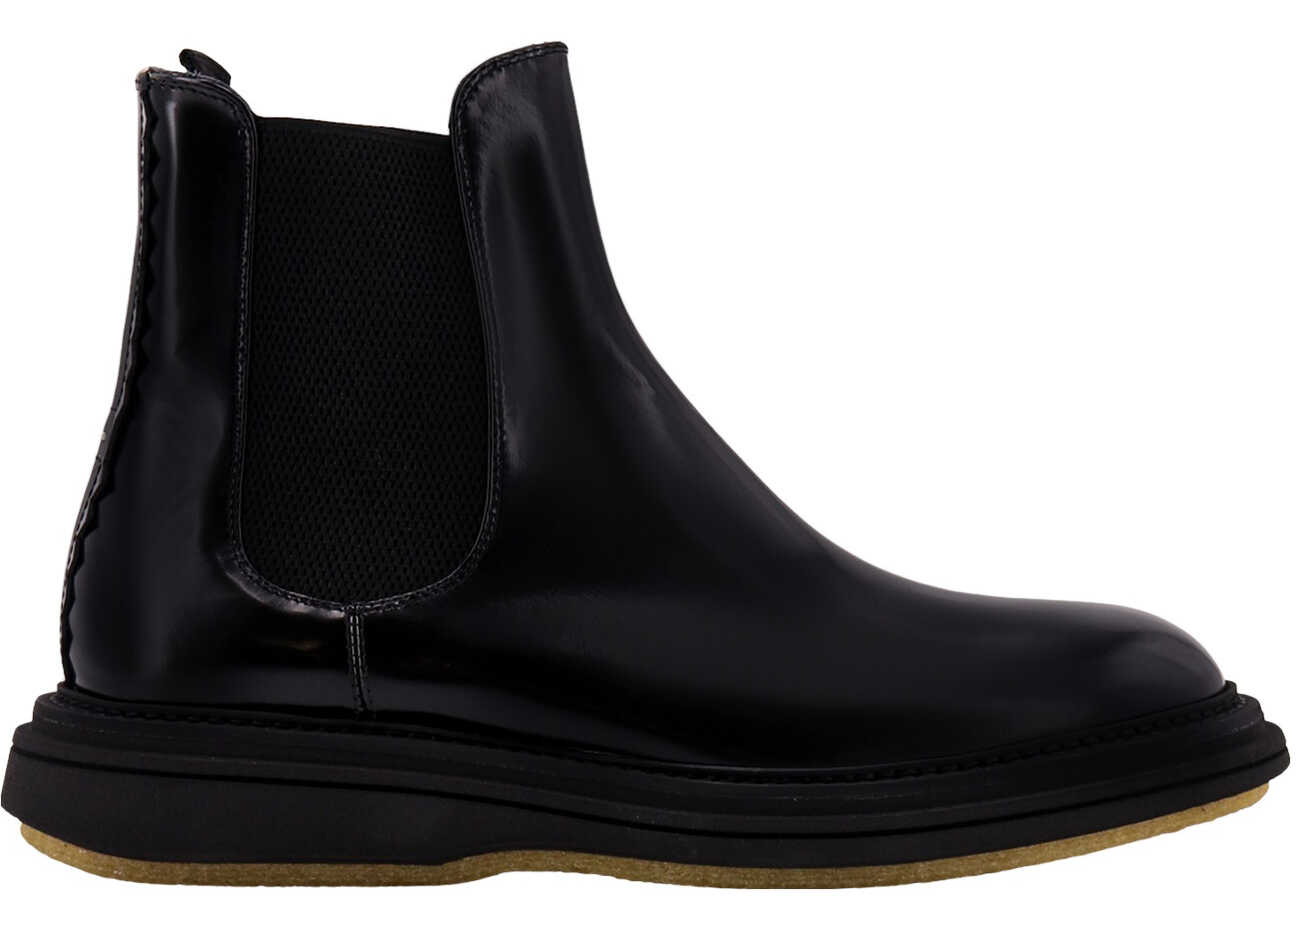 THE ANTIPODE Boots Black